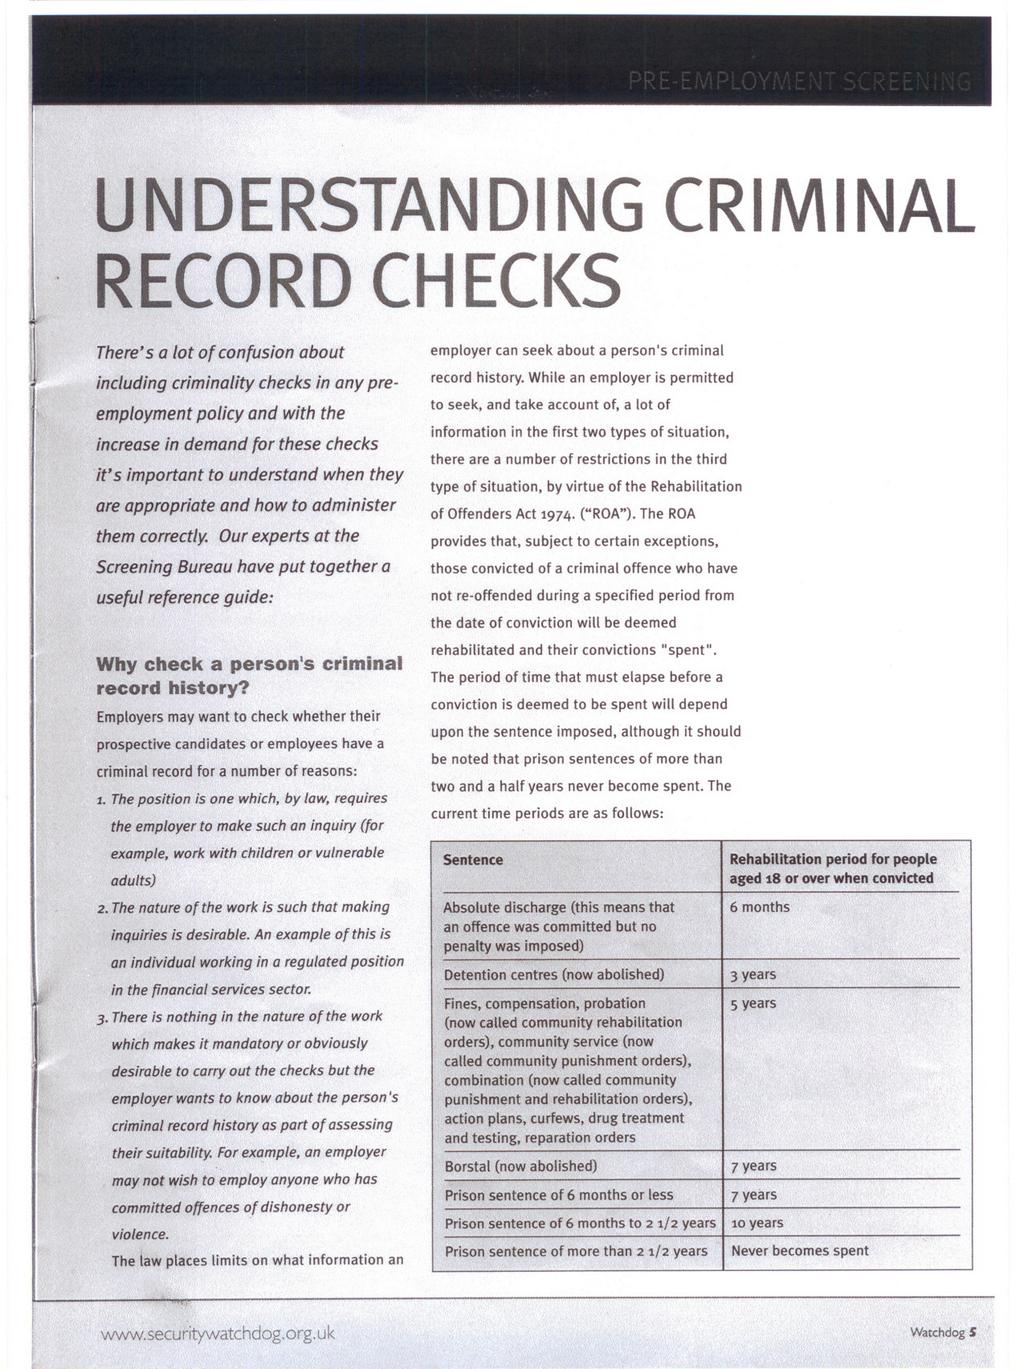 UNDERSTANDING RECORD CHECKS CRIMINAL There's a lot of confusion about including criminality checks in any preemployment policy and with the increase in demand for these checks it's important to